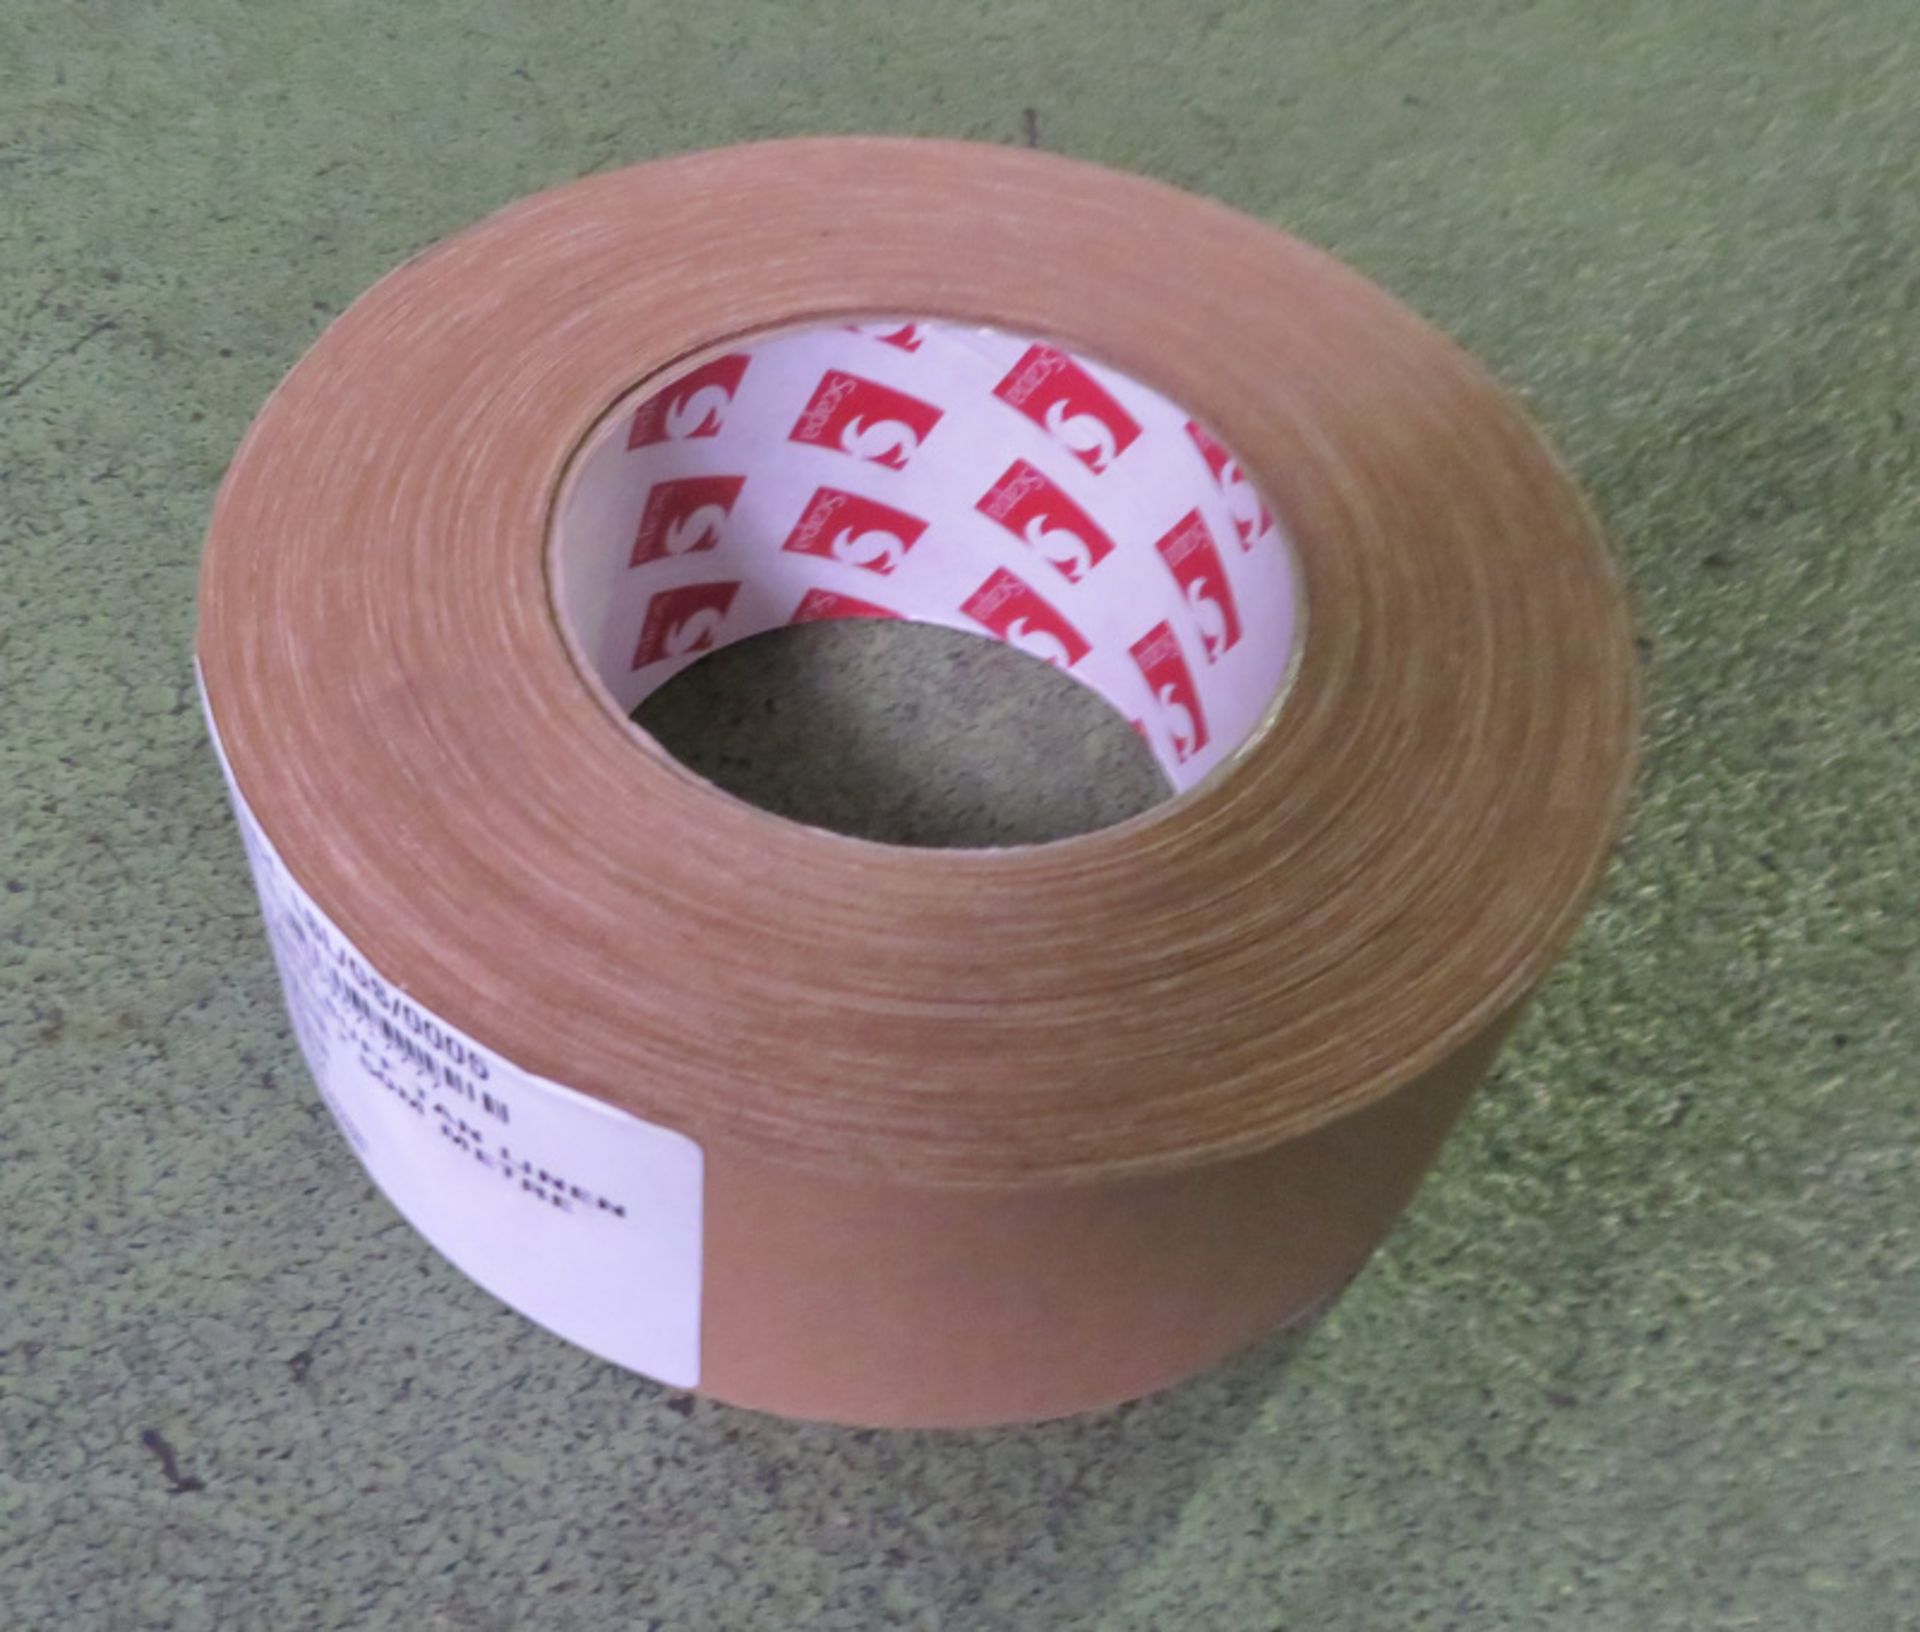 Scapa Pro 3302 Beige Cloth Adhesive Tape - 50mm x 50m - 2 Boxes - 16 rolls per box - Image 3 of 3